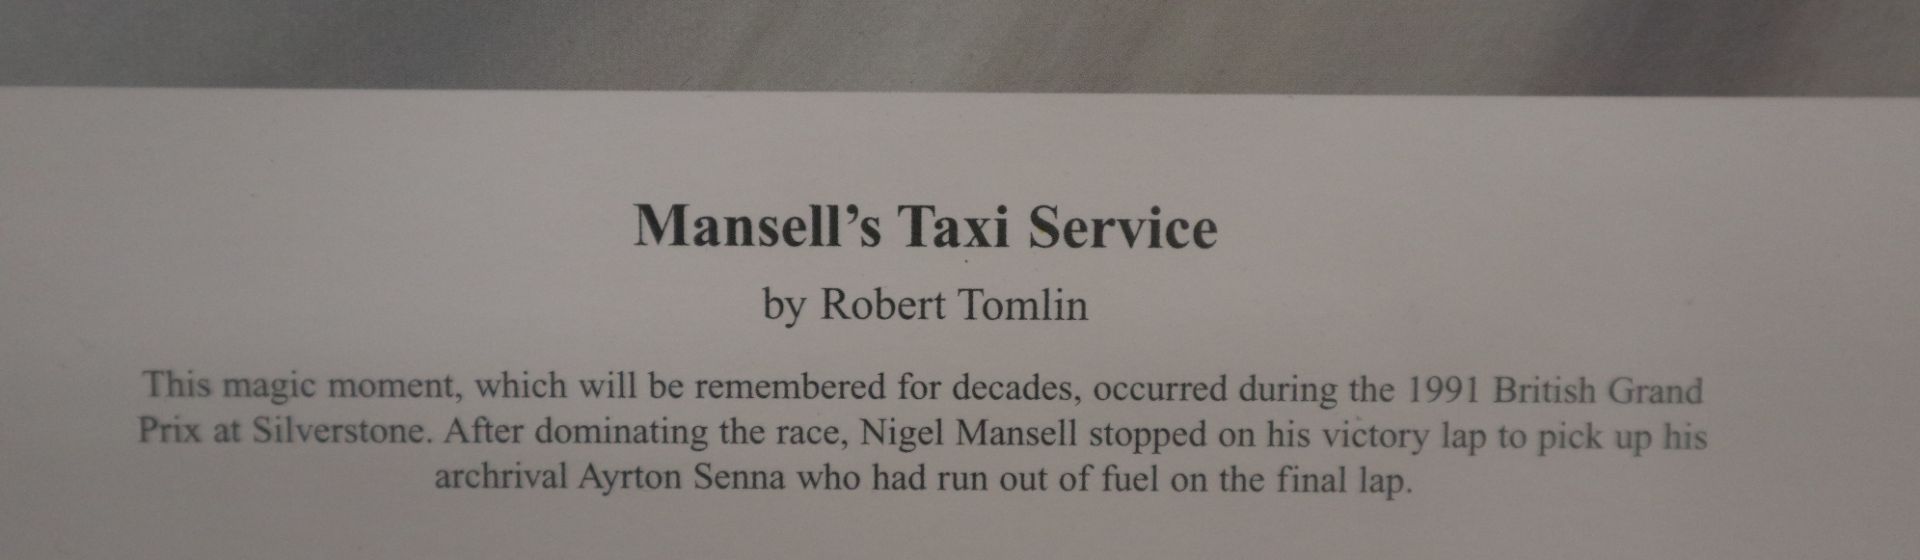 Autographed by Nigel Mansell & artist signed L/E print by Robert Tomlin - Mansell's Taxi Service - Image 3 of 4